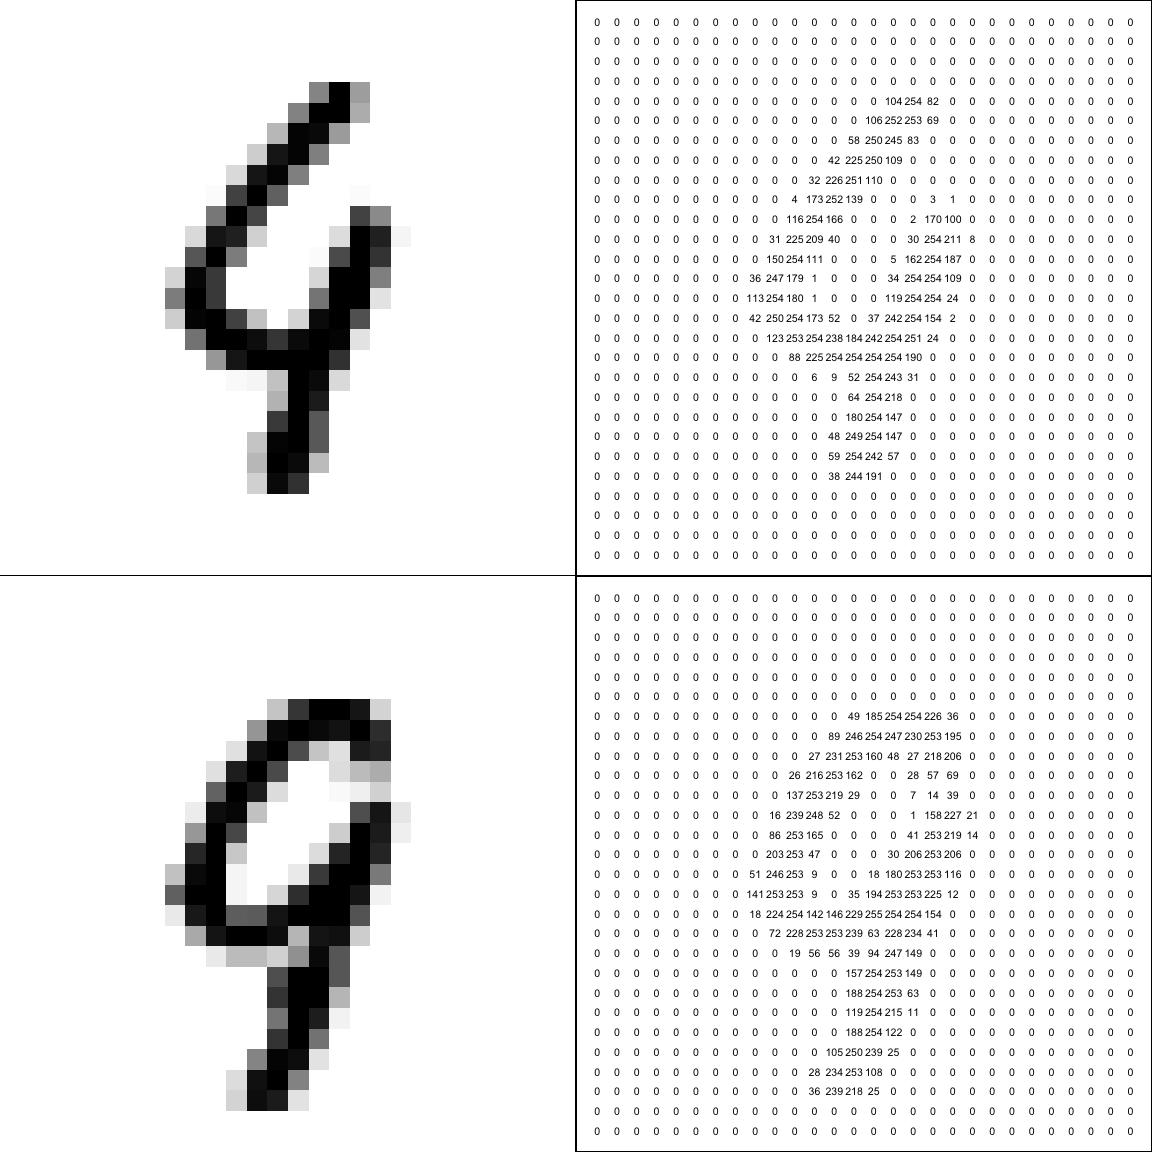 Top row: test image 116 and its numerical representation $\tilde{\mathbf x}_{116}$. Bottom row: image number 8112 in the training data set and its numerical representation $\mathbf x_{8112}$. This training image is  the closest to our test image, but the digits are not the same!